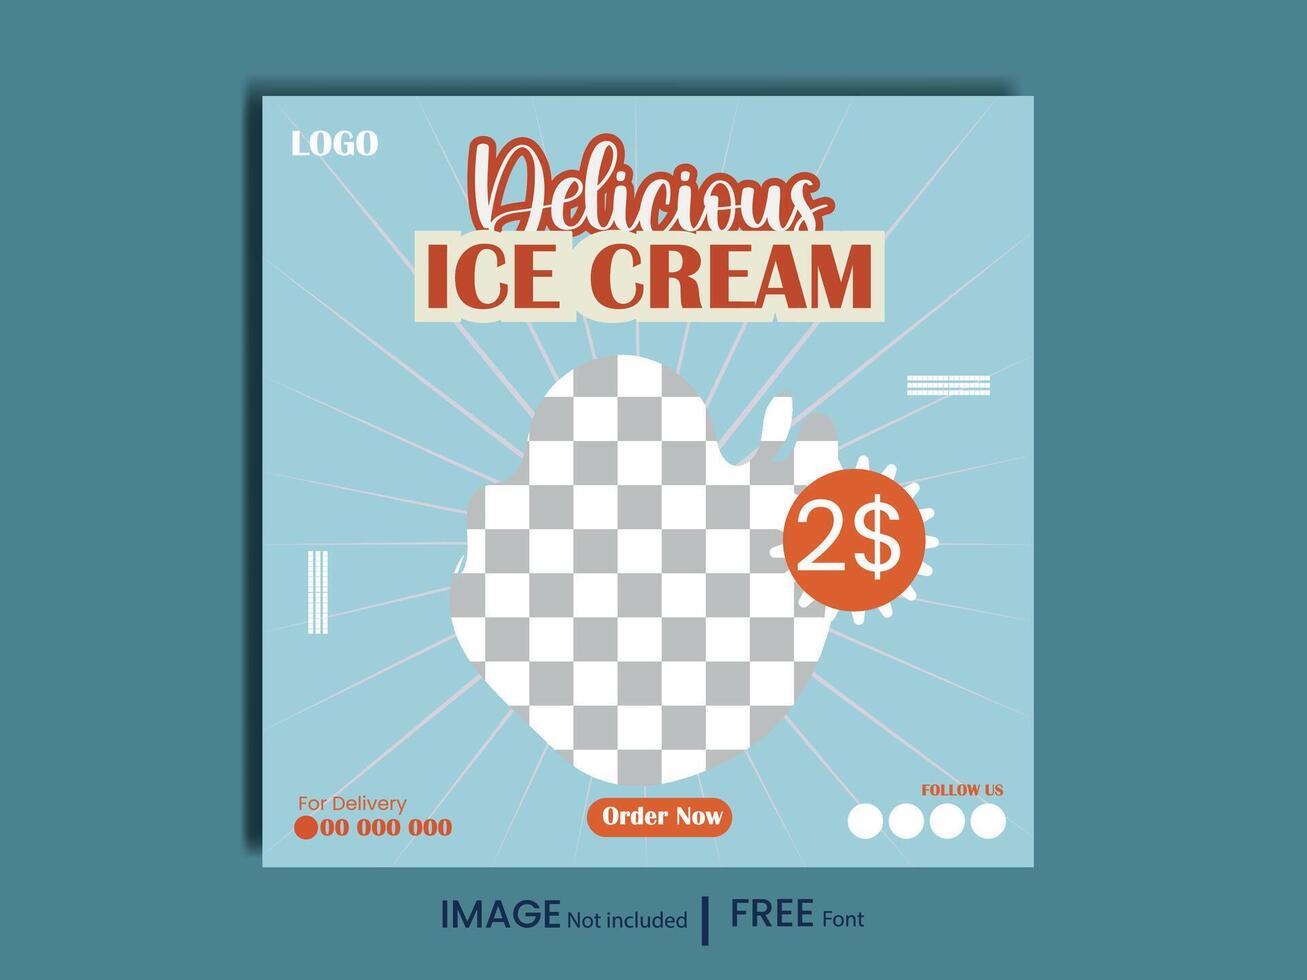 Super delicious ice cream social media banner promotional post or discount offer post design template vector